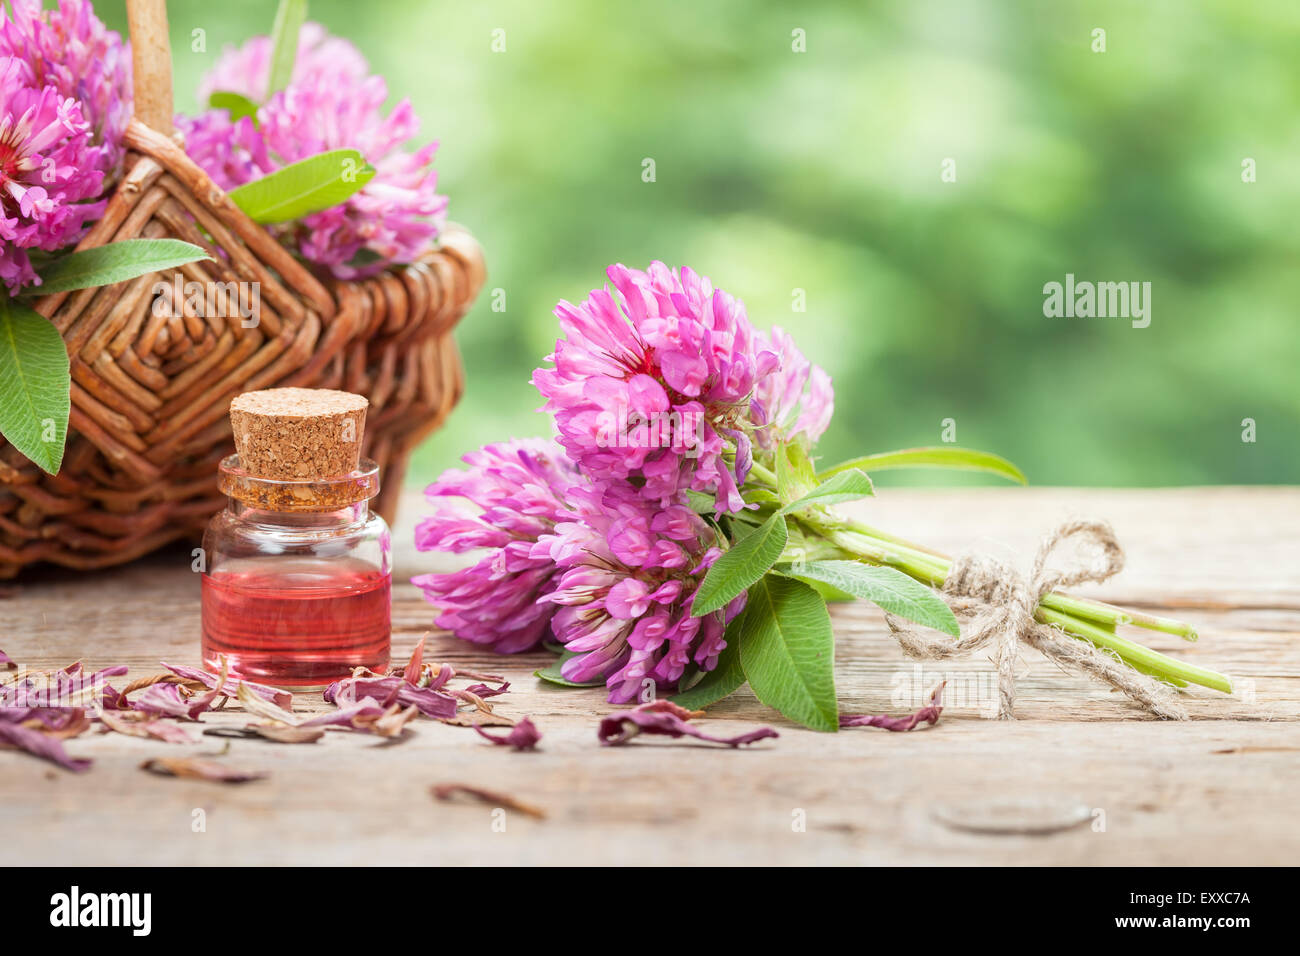 Bottle of elixir or essential oil, bunch of clover and flower in basket. Stock Photo